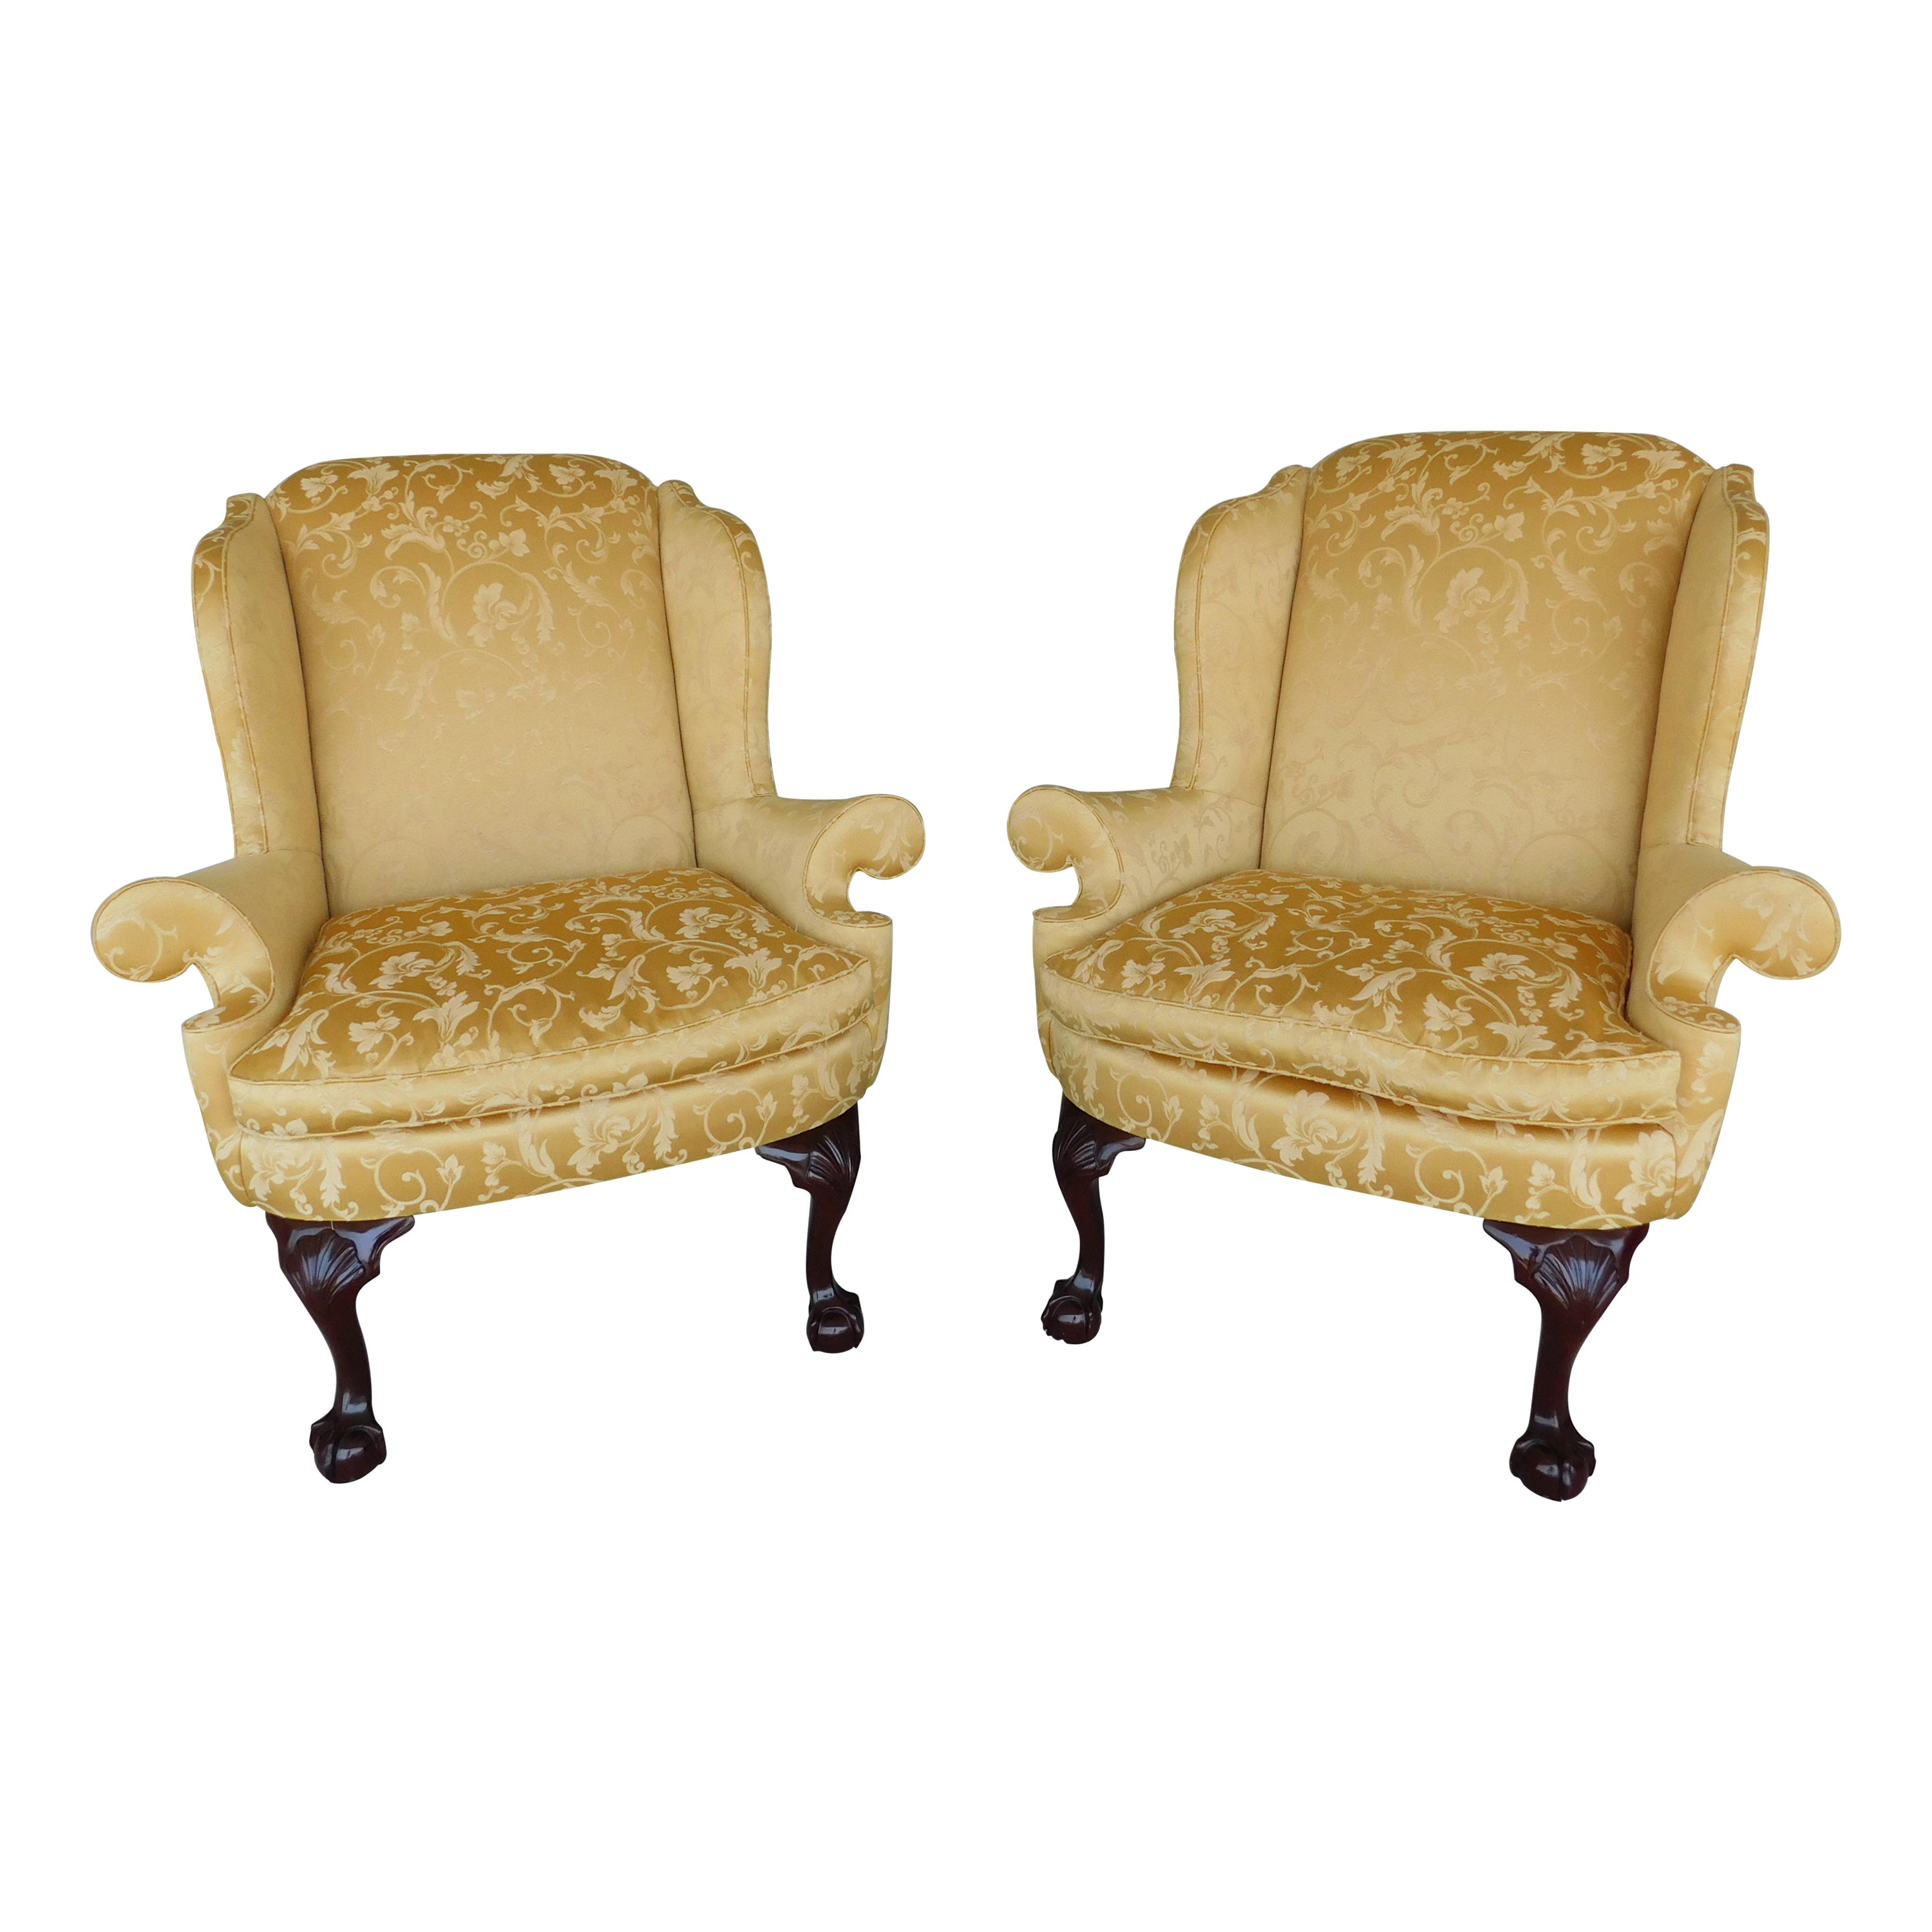 Kindel Winterthur Collection Chippendale Style Wing Back Chairs - a Pair For Sale